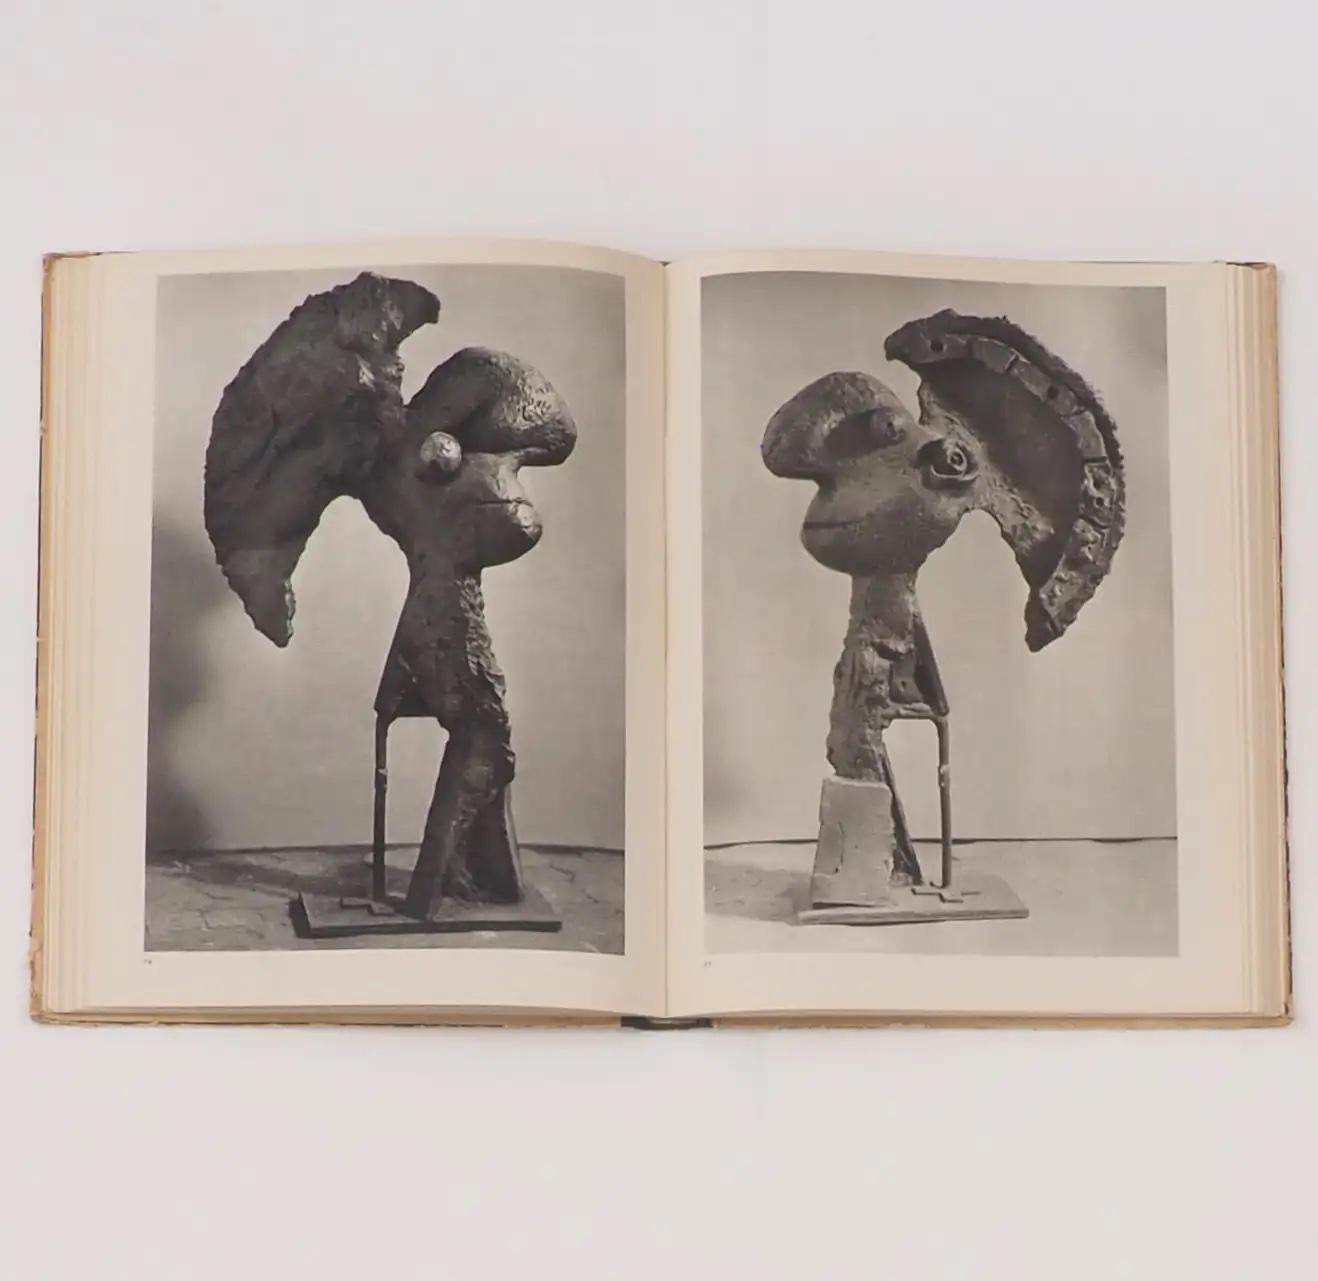 First Edition, published by Les Editions du Chêne, Paris, 1949. Photographs by Brassai. Text in French by Daniel Henry Kahnweiler. 

An important collaboration between Picasso and the great photographer Brassai who chose the artist's hand as the